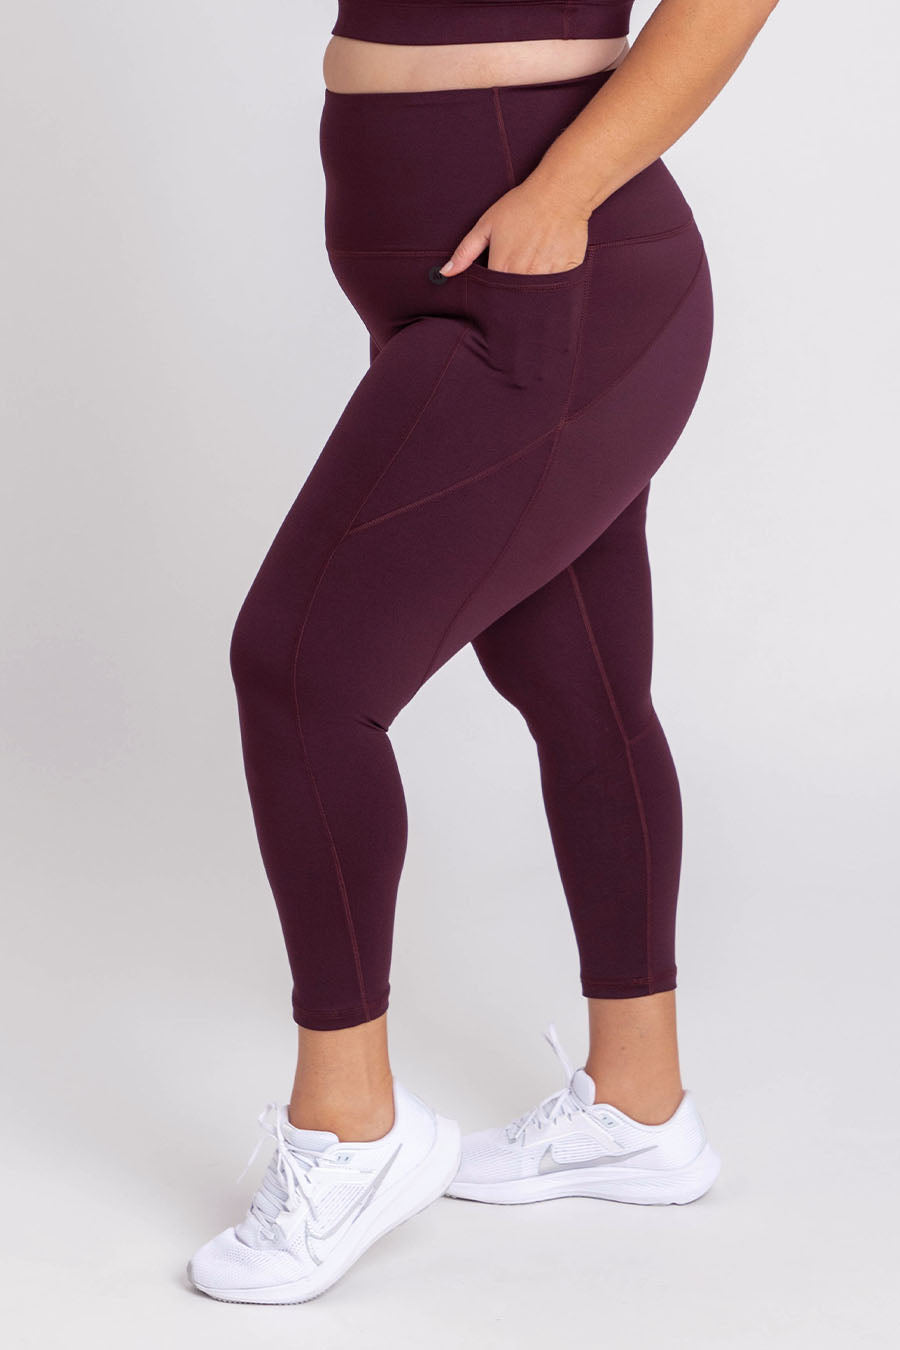 Training Pocket 7/8 Tight in Wine, Gym leggings, Shop Active Truth